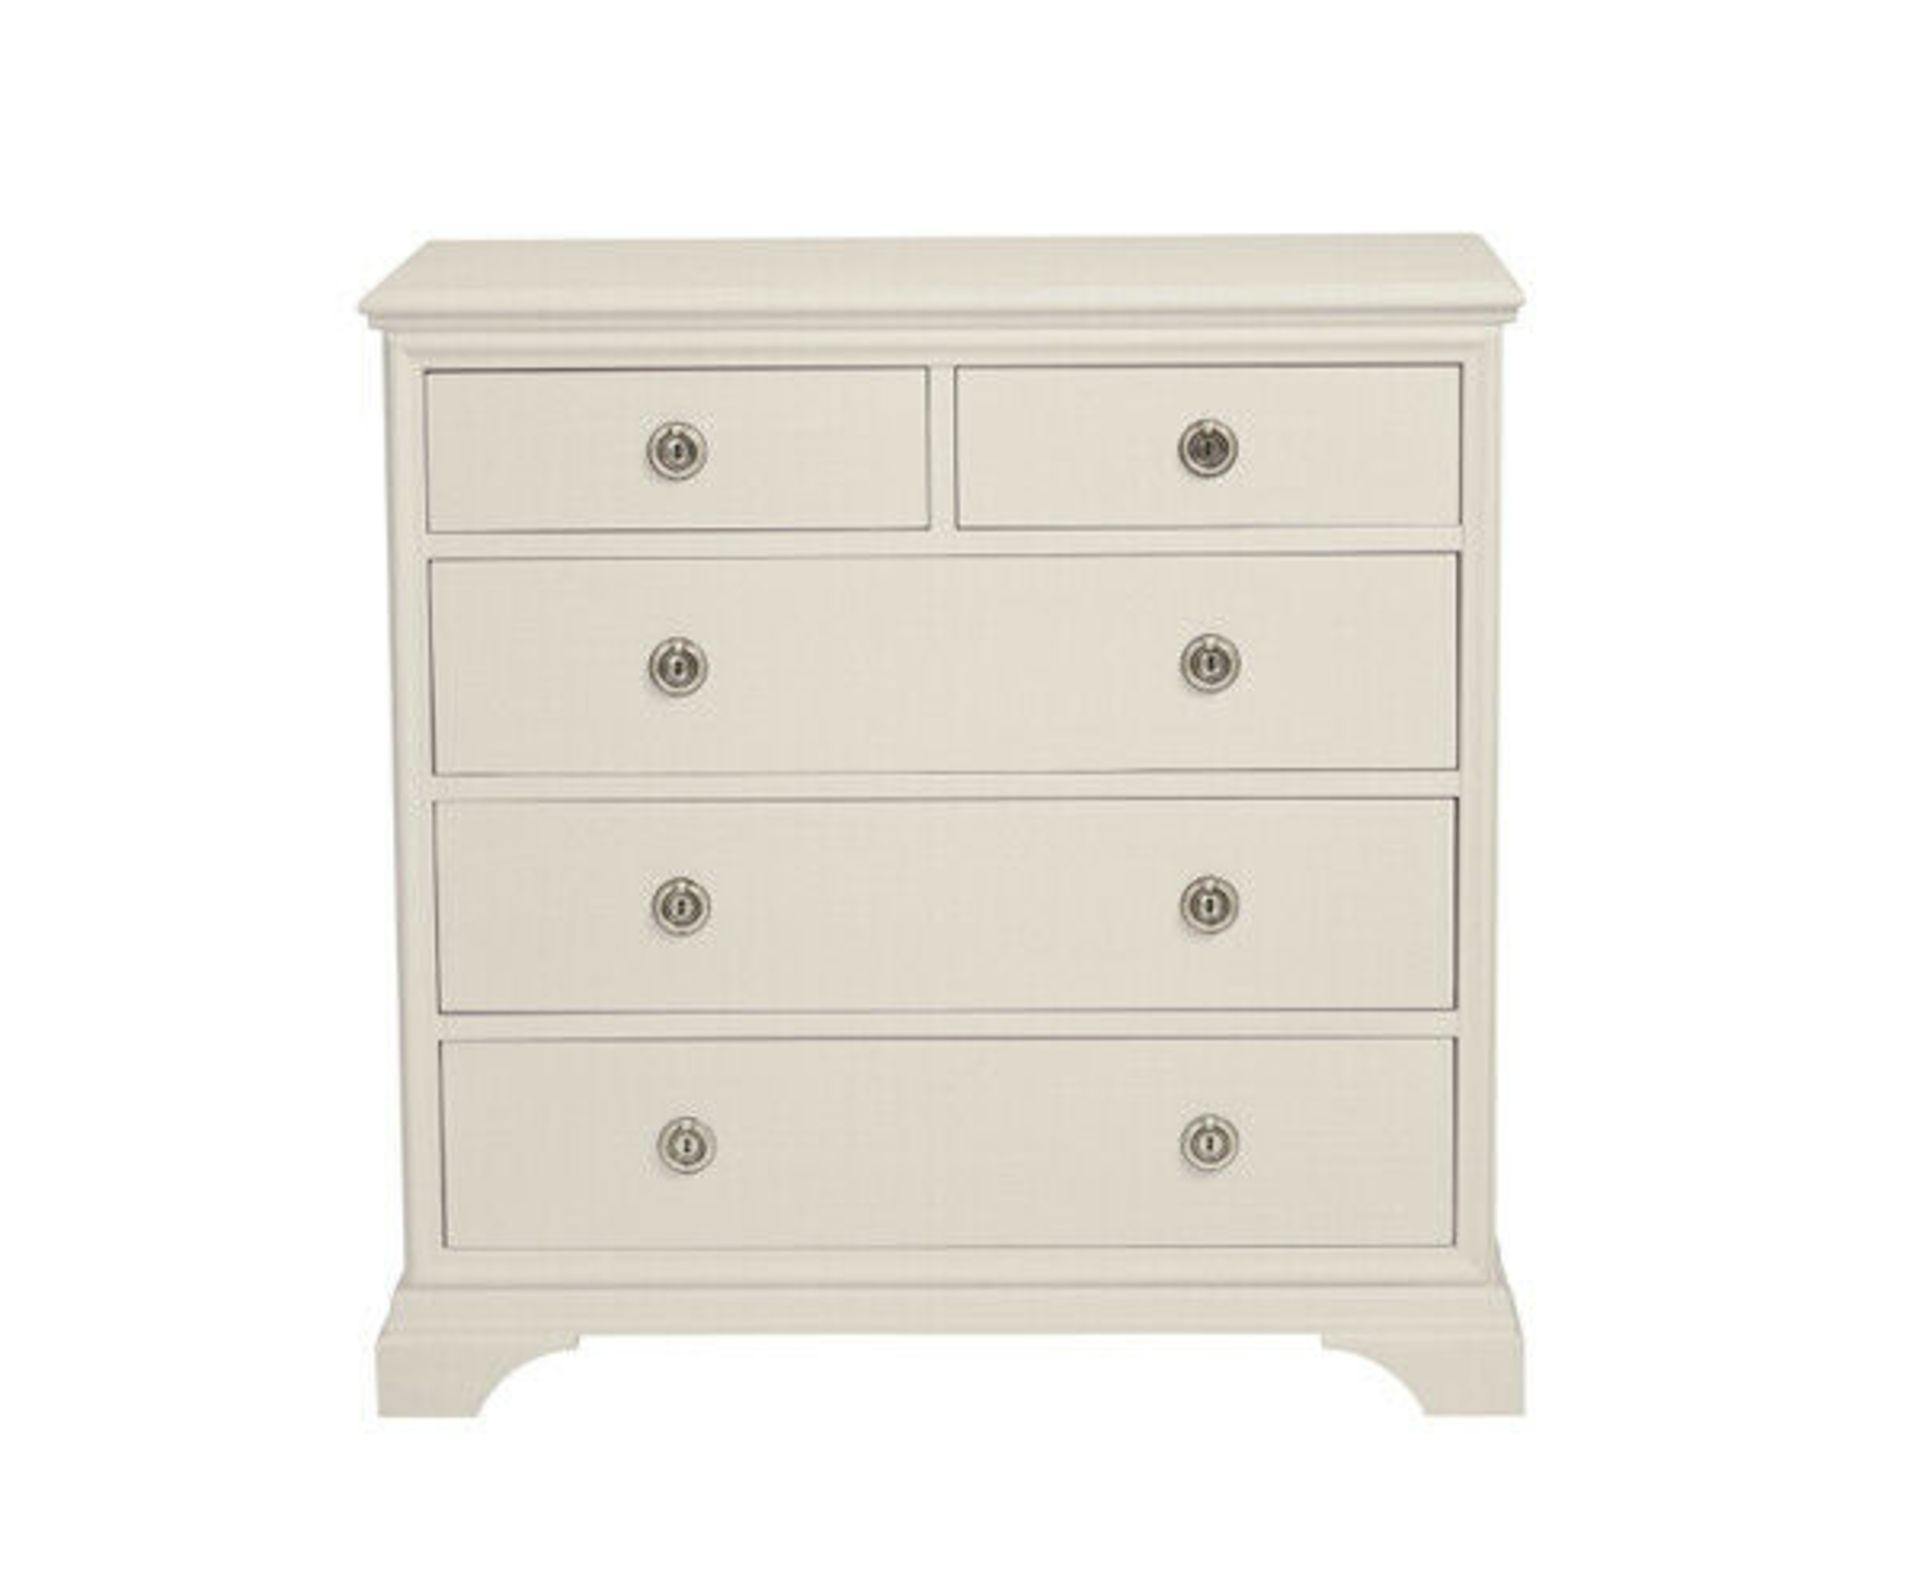 Laura Ashley Gabrielle Cotton White 3+2 Drawer Chest features two shallow drawers for sundry